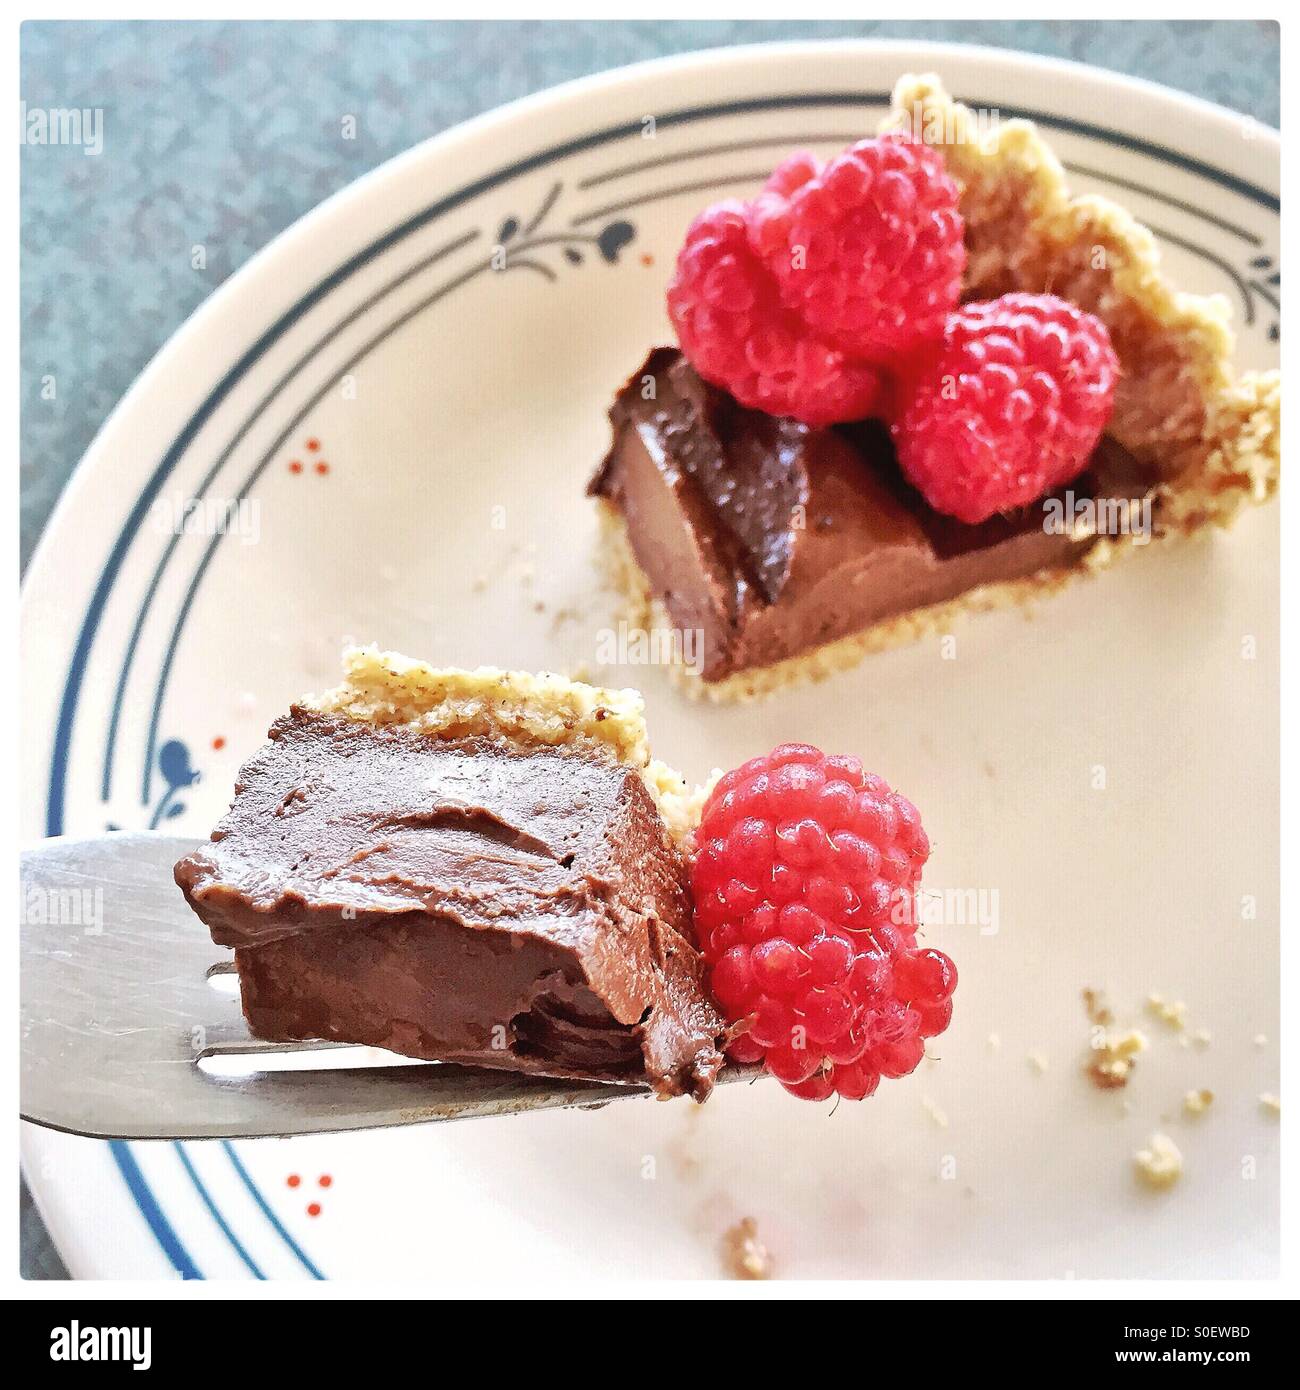 A sliver of chocolate torte topped with raspberries is in the background with a bite on a fork in the foreground. Stock Photo